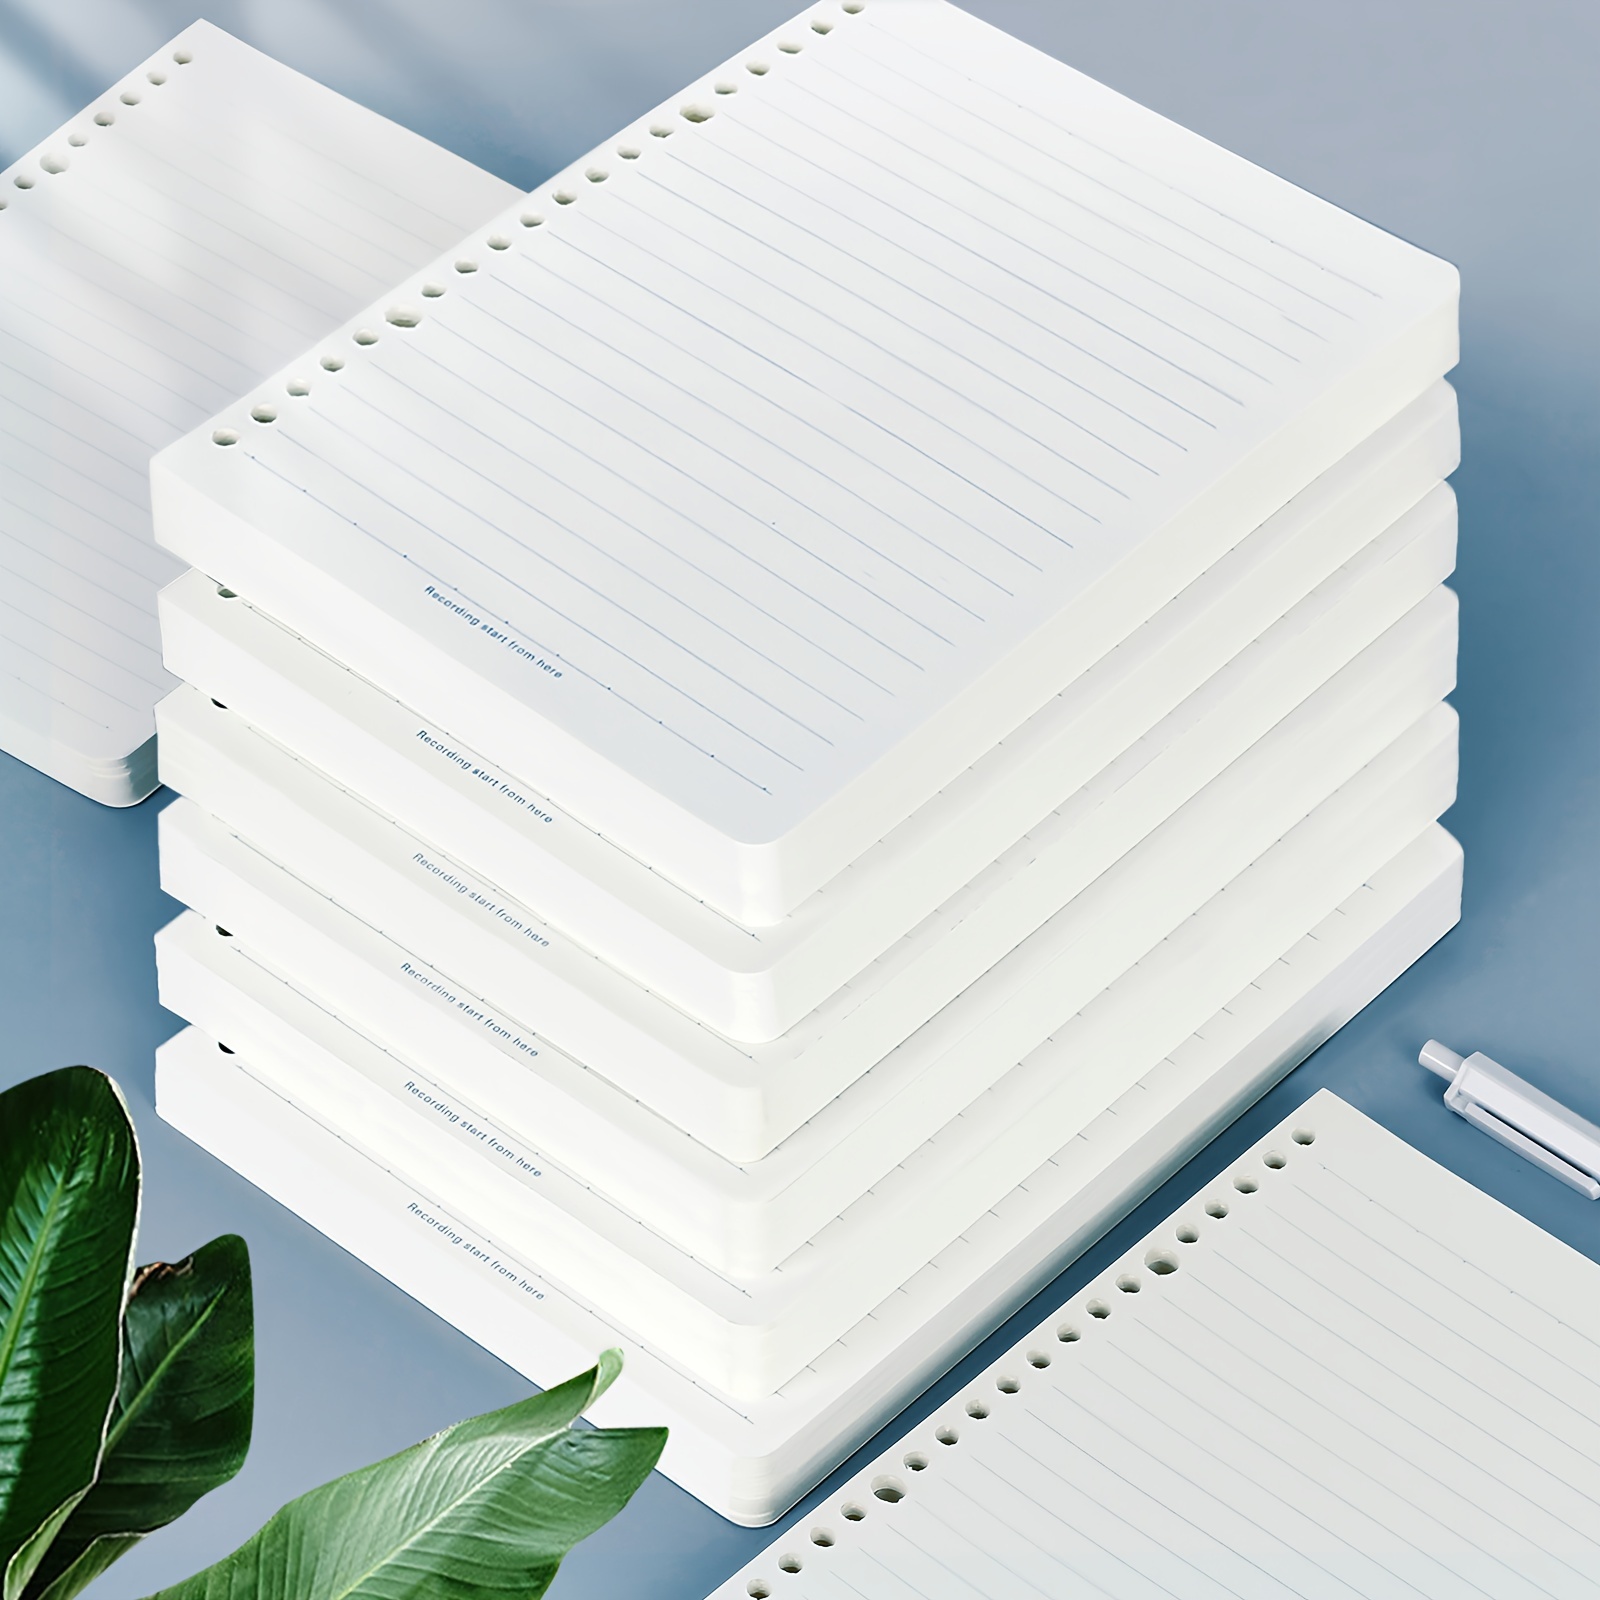 

1 Piece/3 Pieces/5 Pieces, 200 Pages/600 Pages/1000 Pages, A5/b5 Detachable Portable Loose-leaf Paper Refill, Thick Loose-leaf Paper, Suitable For Loose-leaf Binders, Notebook Inserts And Diaries